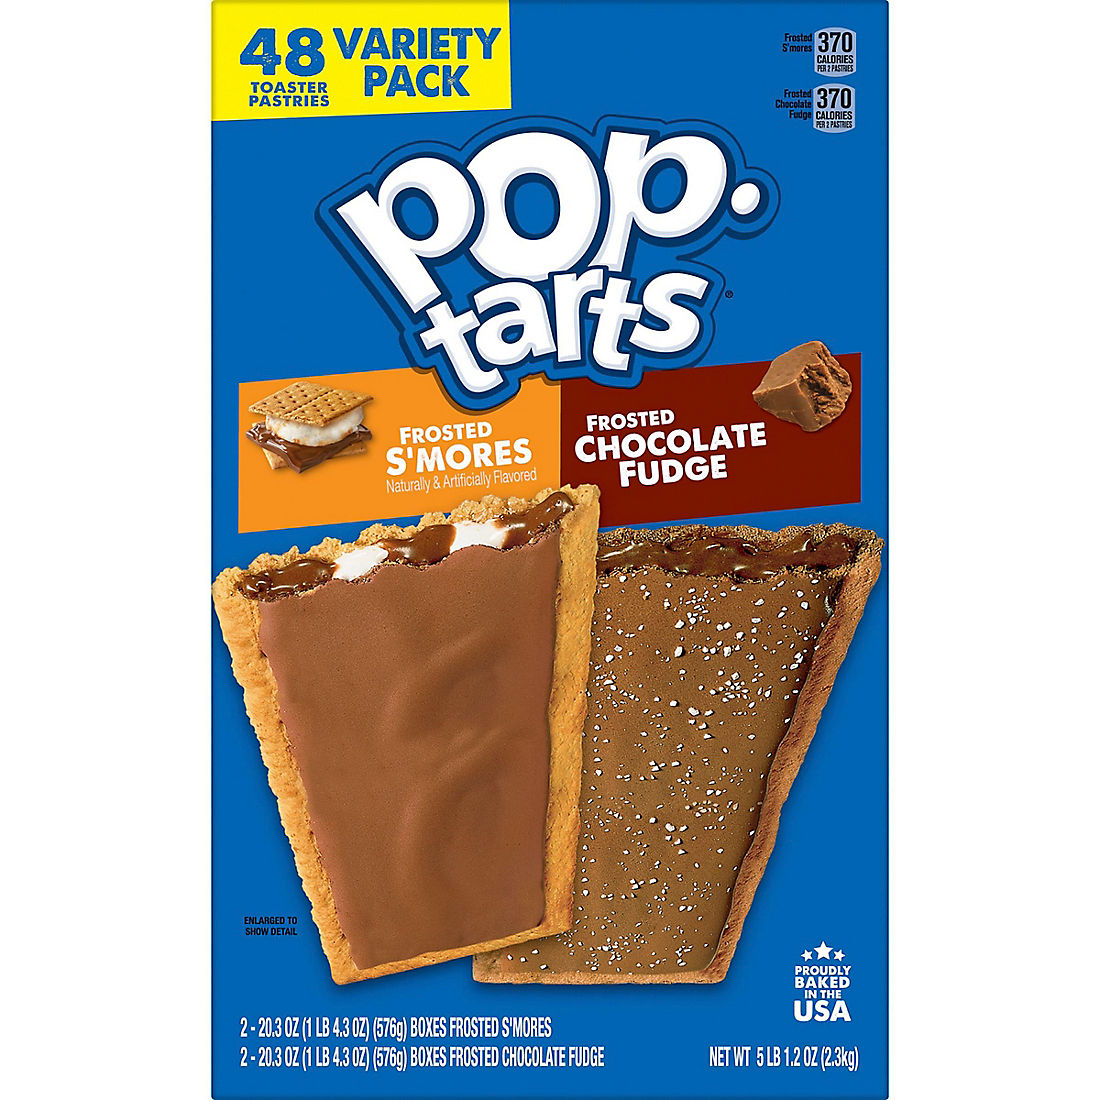 Pop-Tarts Frosted & Frosted Chocolate Fudge Variety Pack, 48 ct. - BJs Wholesale Club